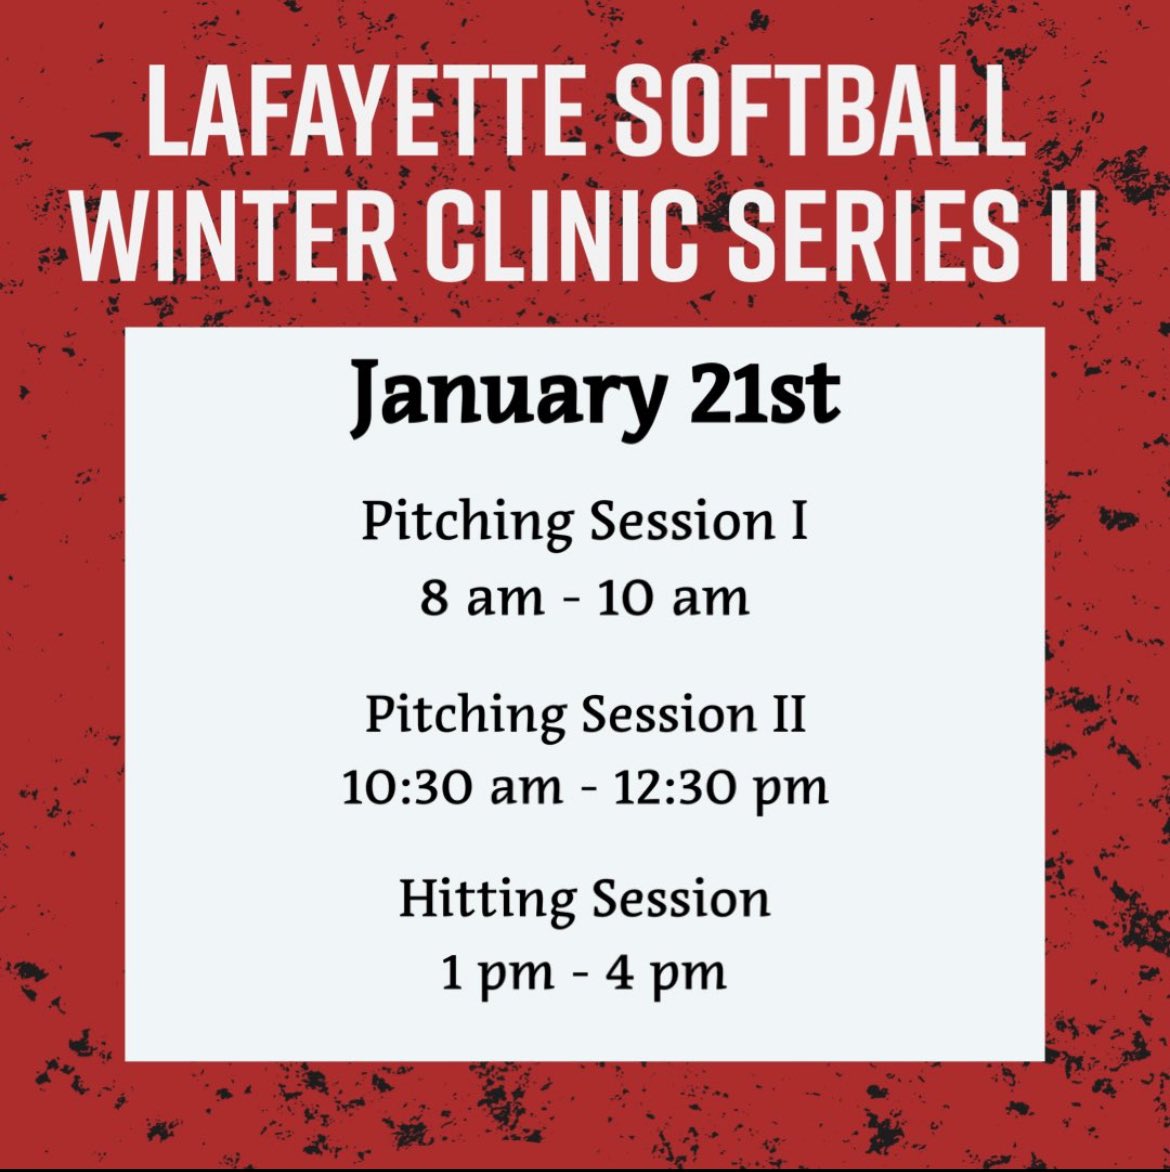 We’re one week away from our last winter clinic! This will be the last chance for us to see you in action before the summer. Sign up today!